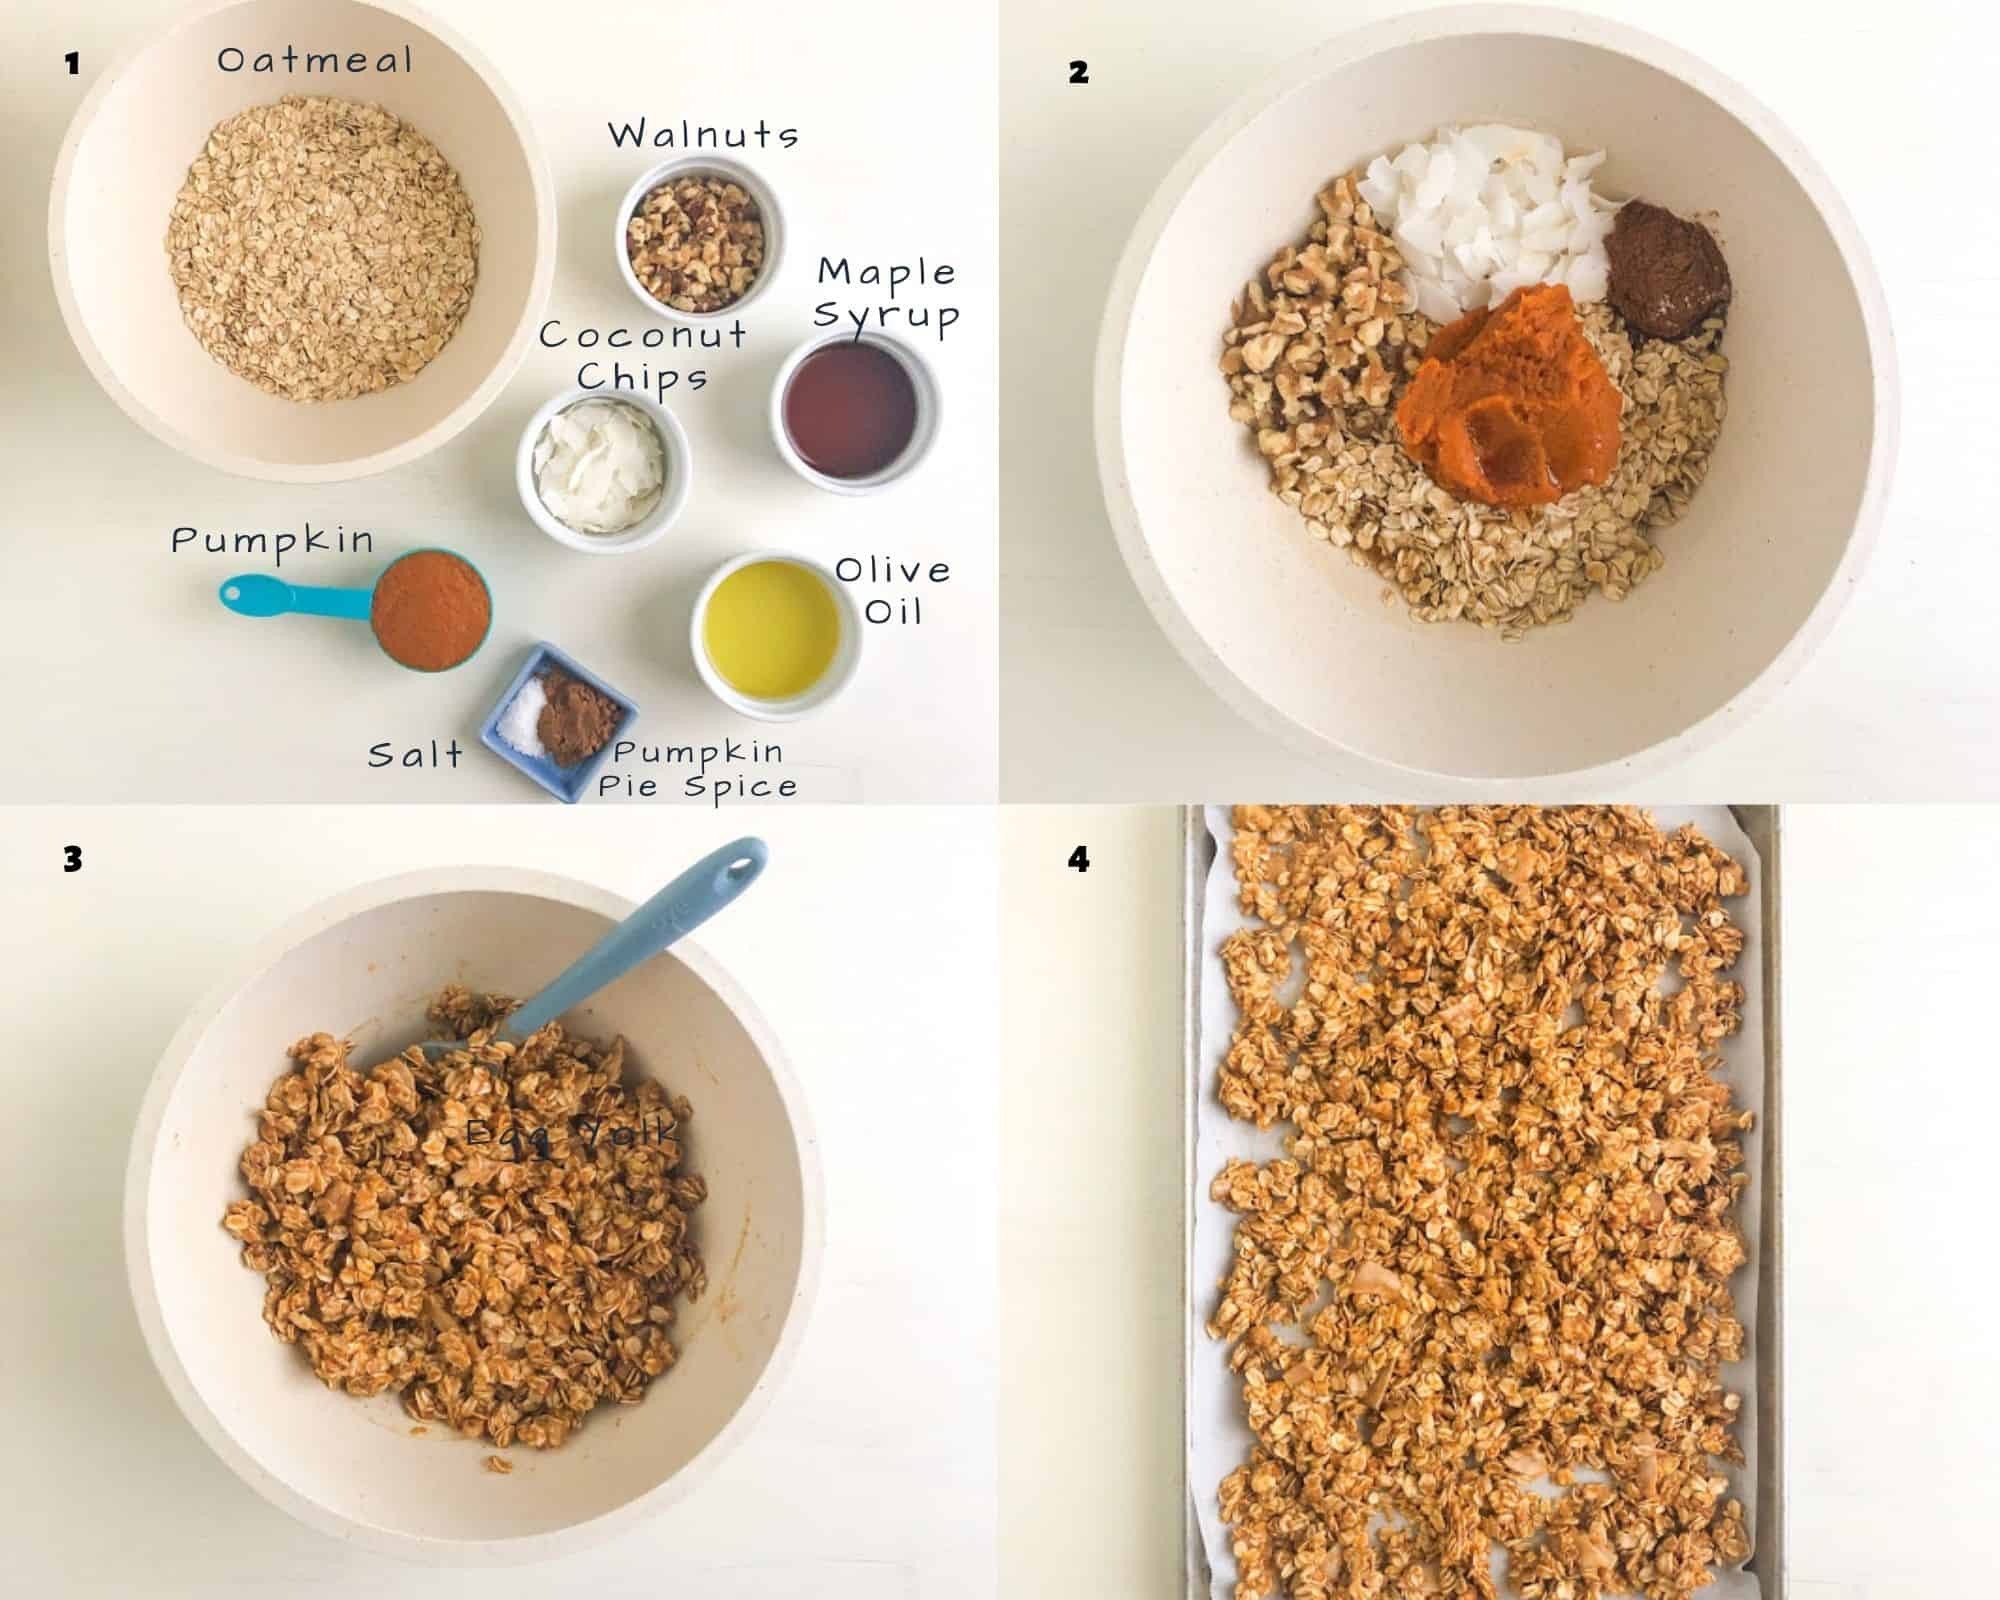 Labeled ingredients for granola and process shots on how to make it.